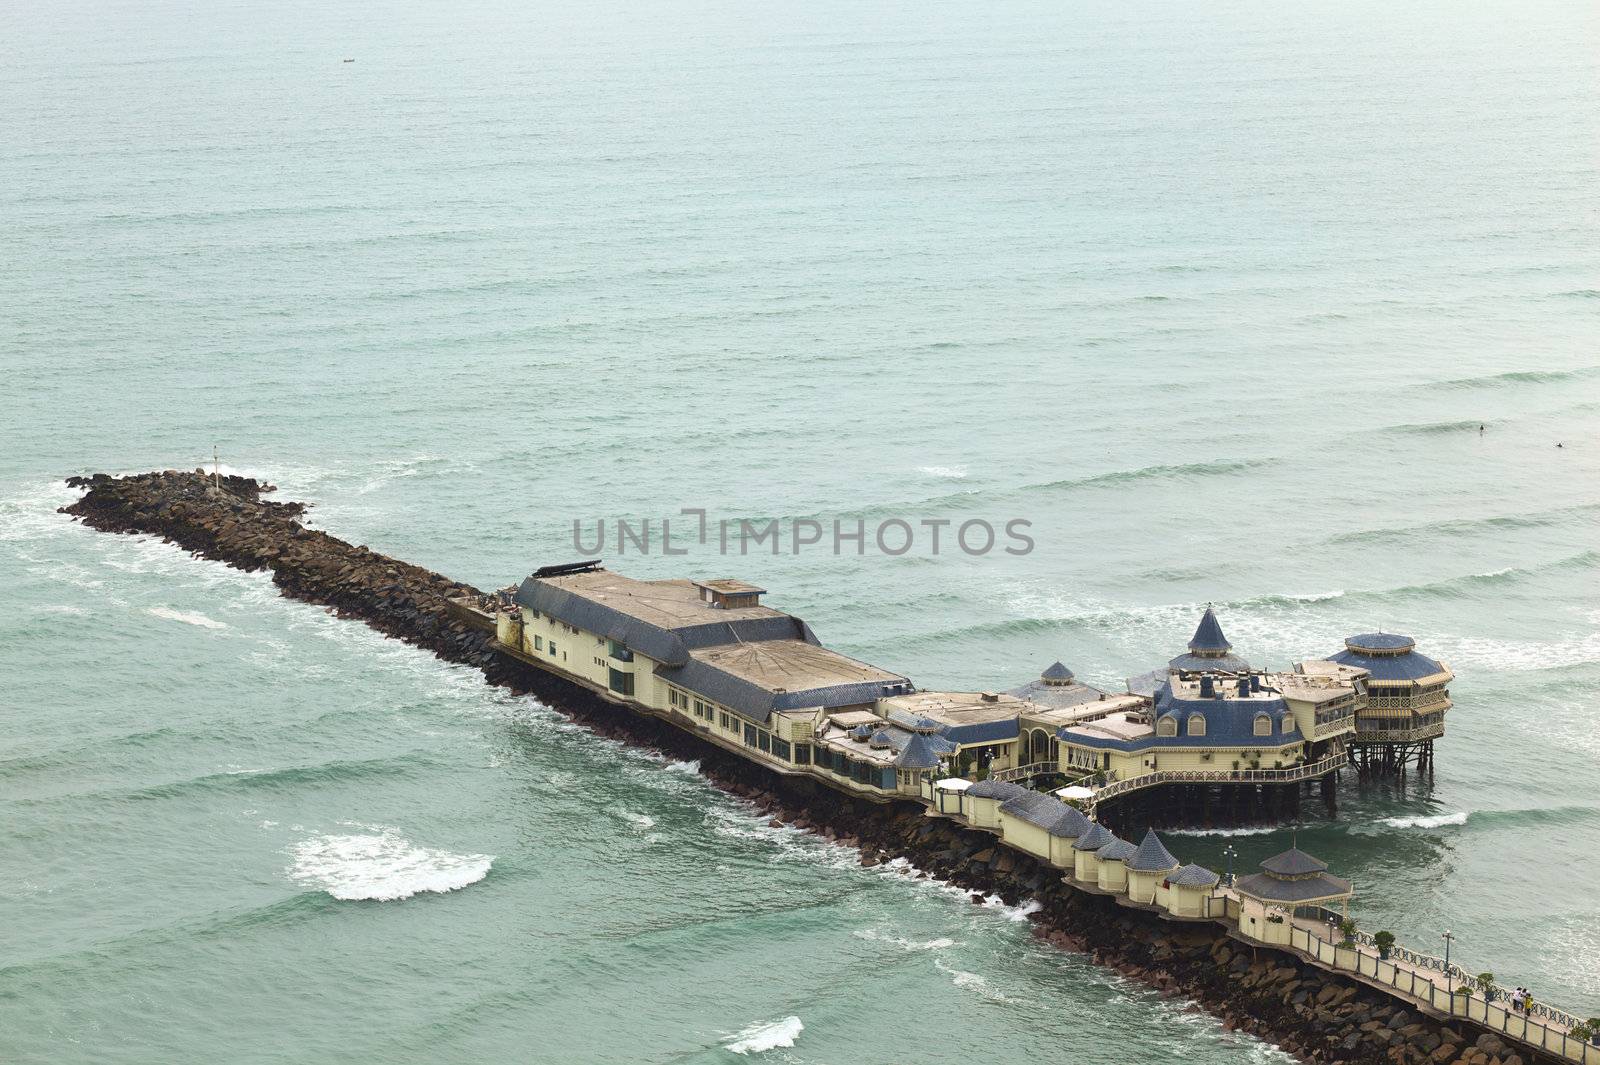 Lima, Peru - September 20, 2011: La Rosa Nautica Restaurant built on a pier stretching into the Pacific Ocean in the district of Miraflores, Lima, Peru.